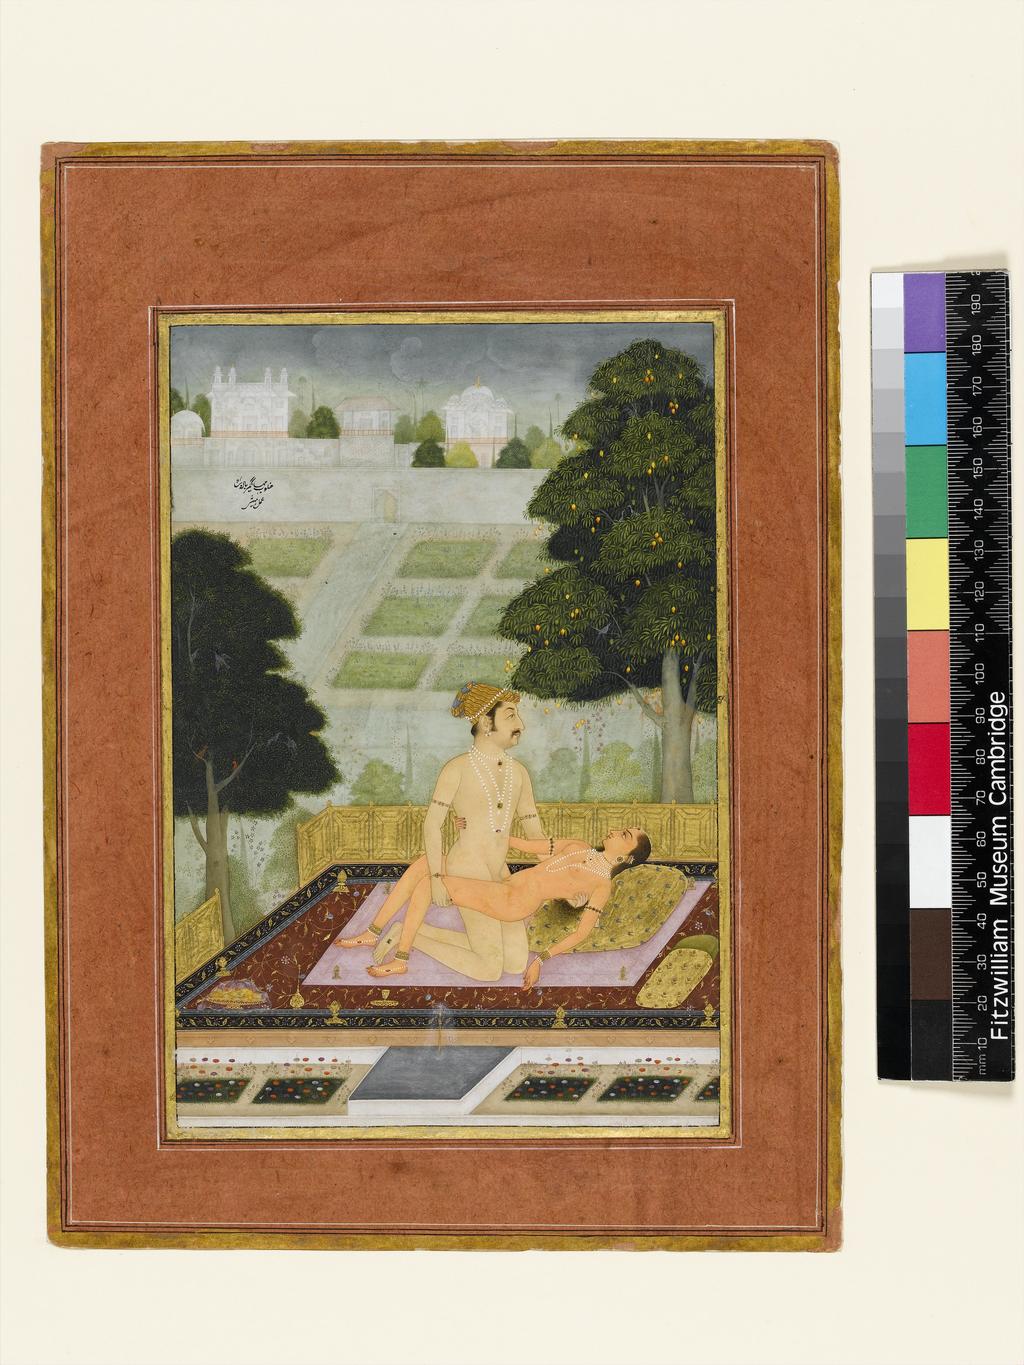 An image of The private pleasure of Emperor Jahangir, by Manesh. Bodycolour including white, pen and ink with gold on paper, height 197mm, width 138mm, circa 1678.